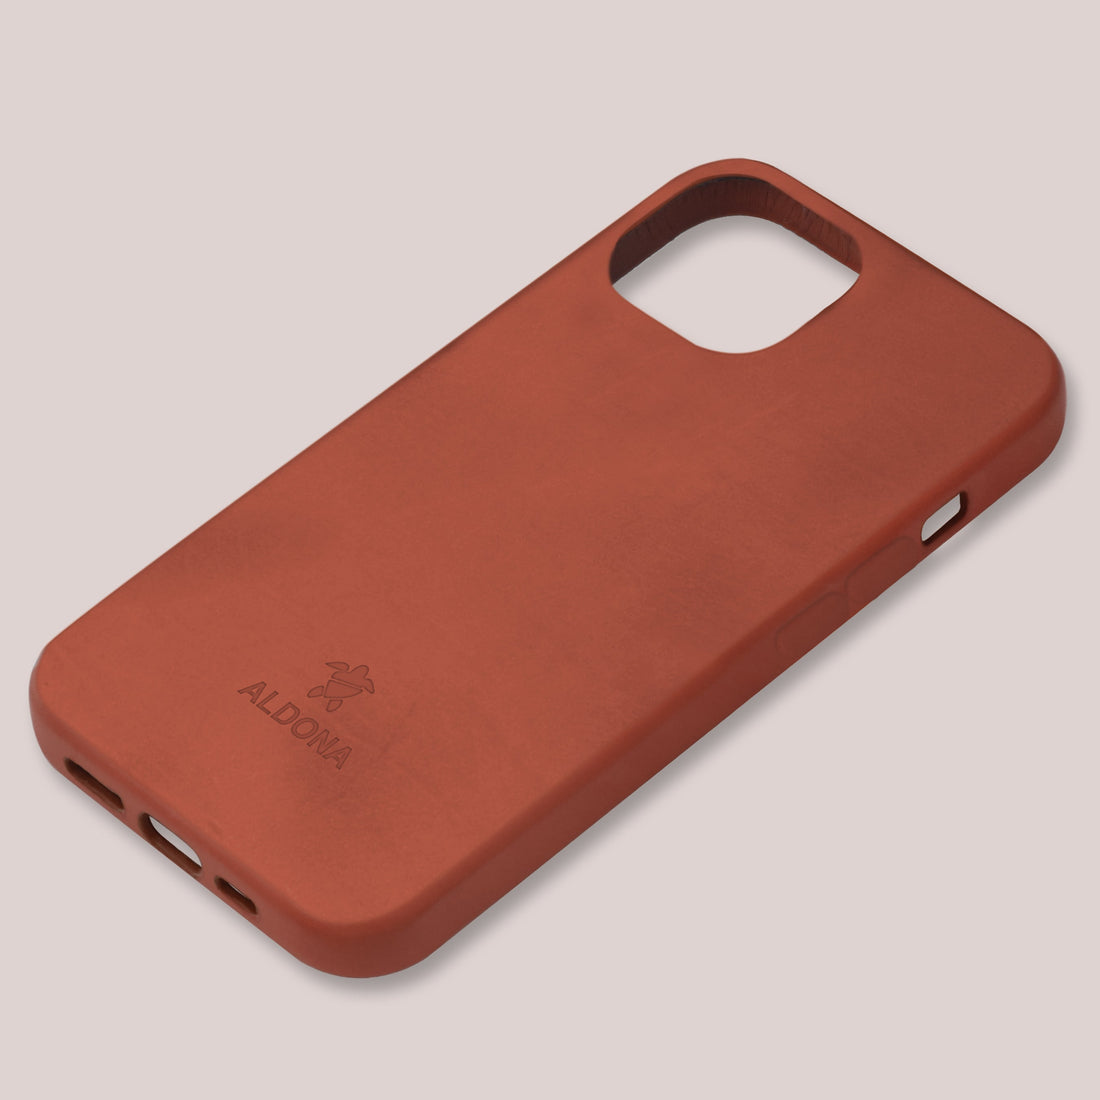 Kalon Case for iPhone 12 series with MagSafe Compatibility - Dark Soil